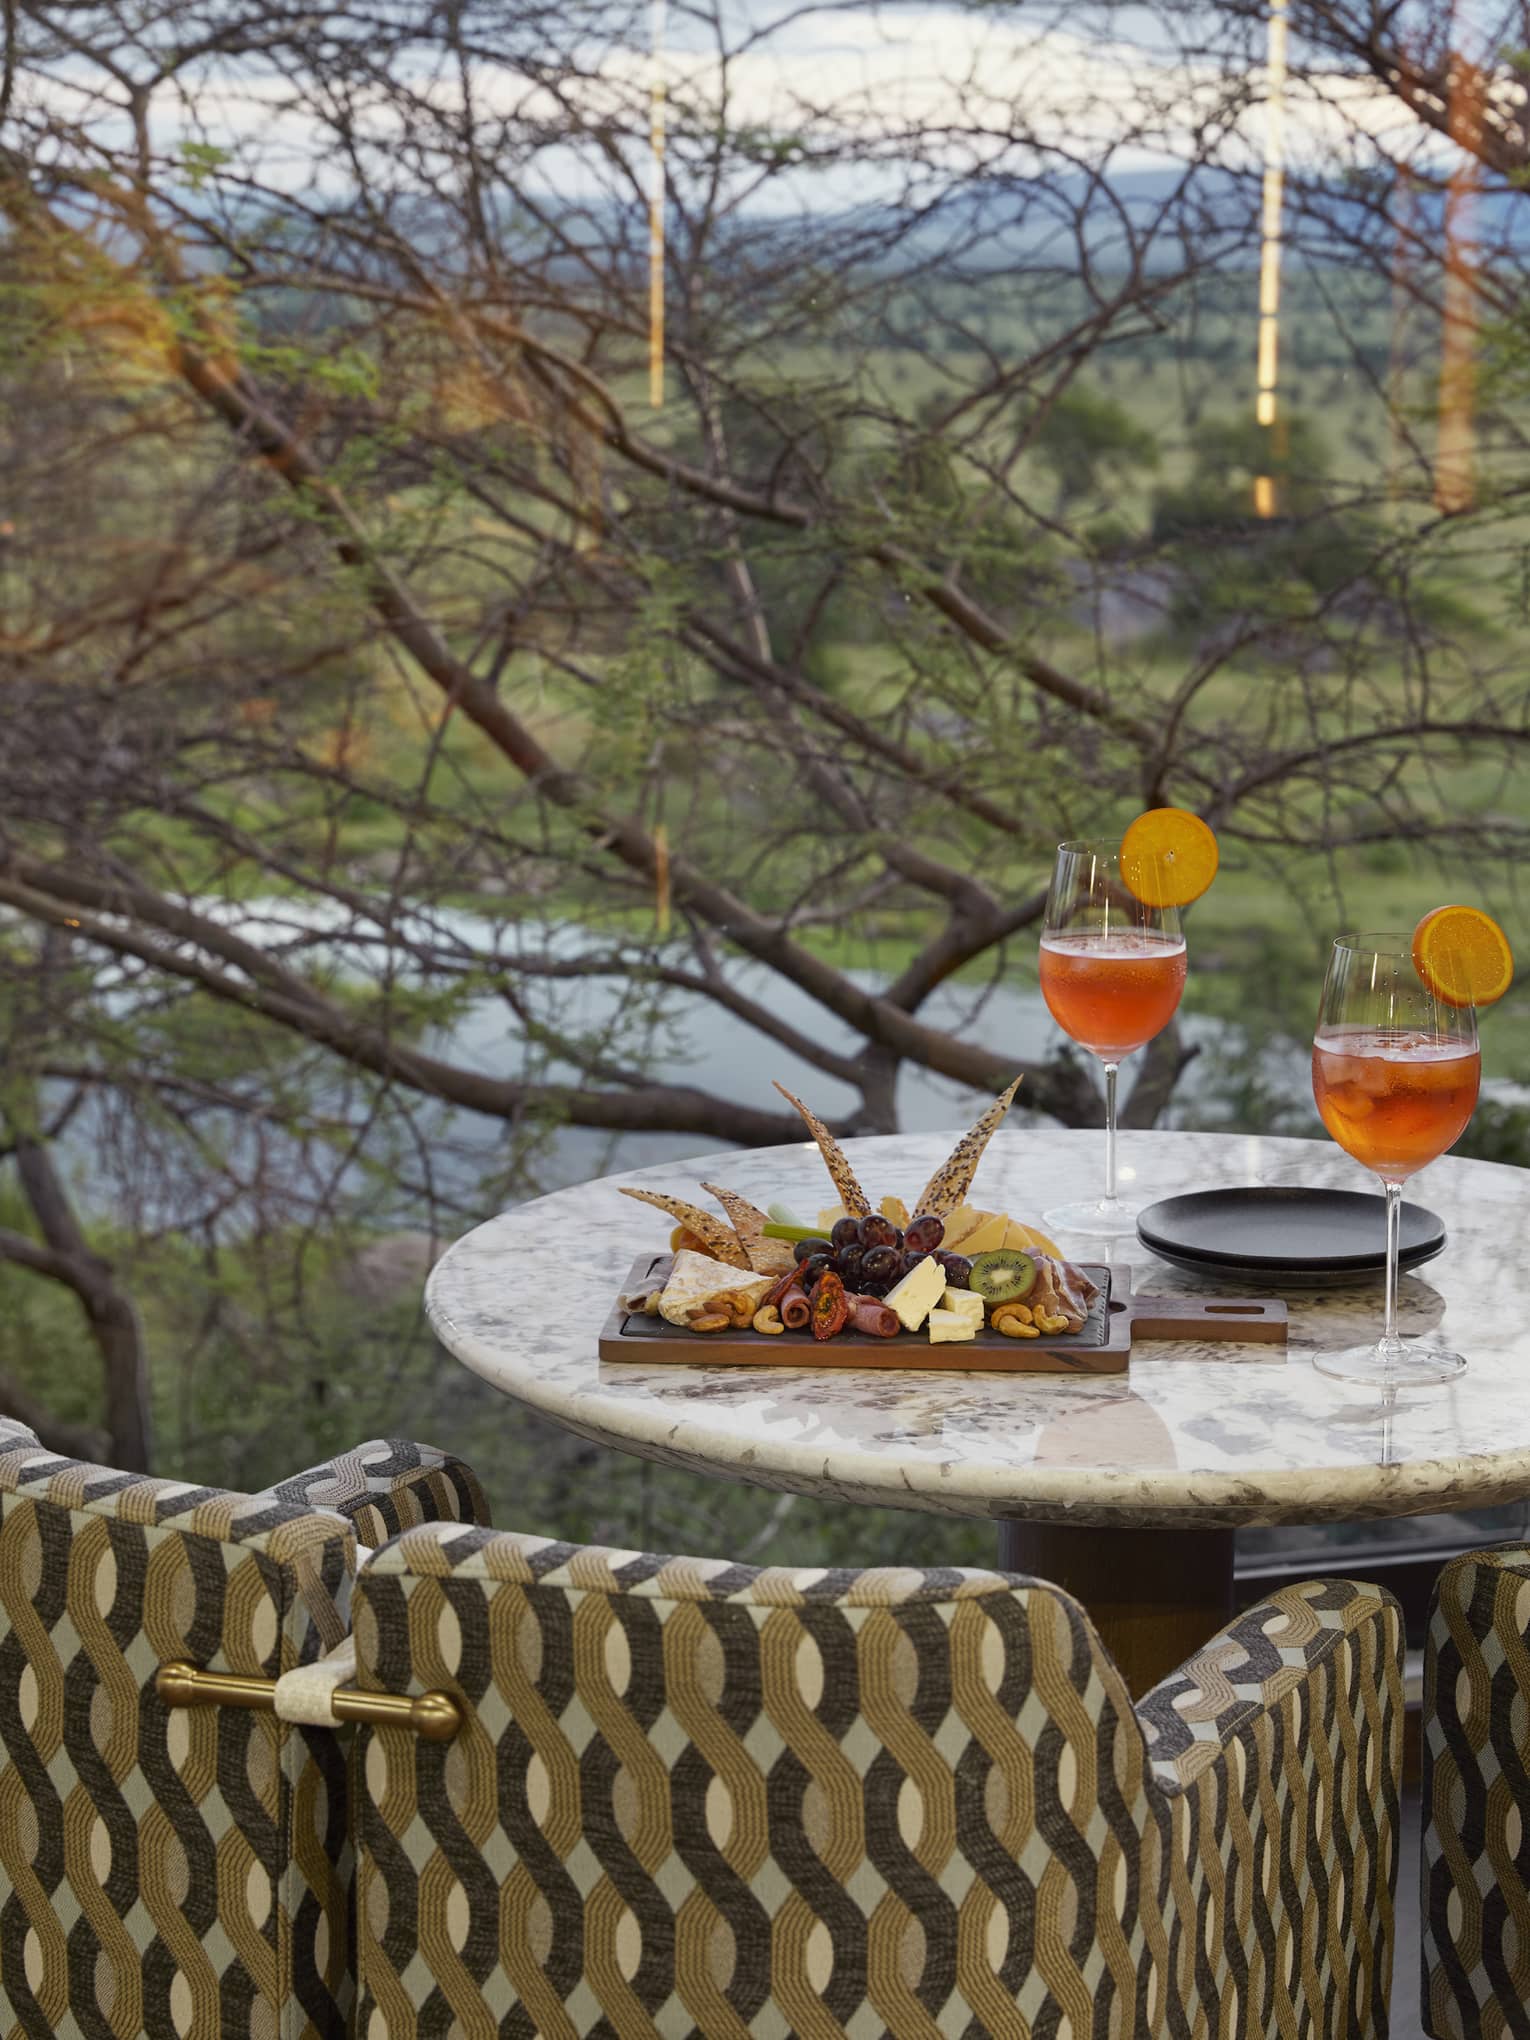 Modern upholstered chair and round marble table set with bites and cocktails on terrace overlooking savannah